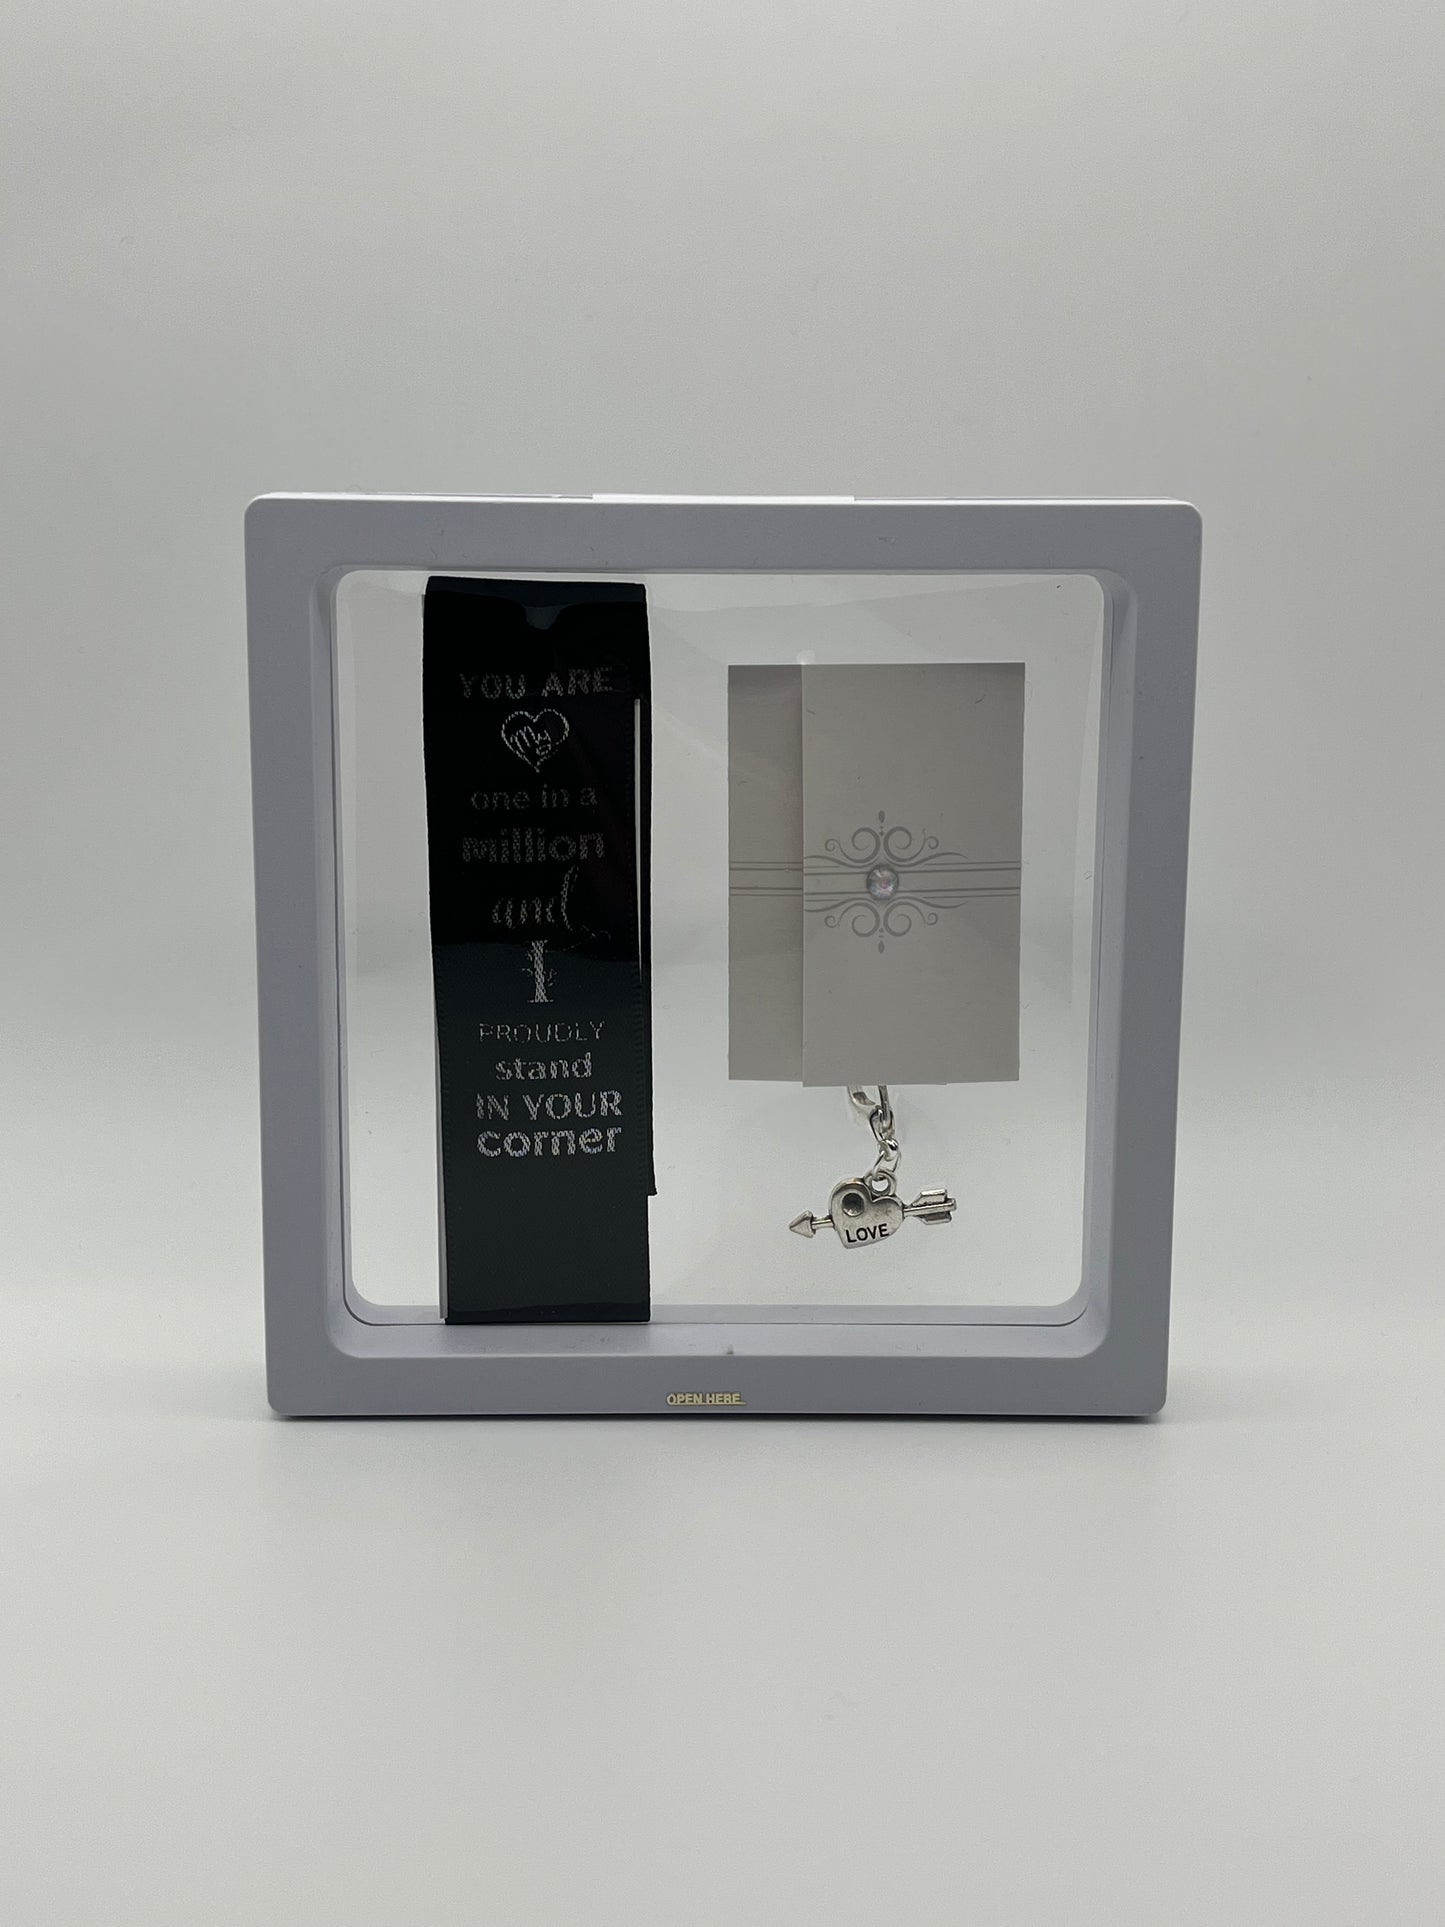 ANNIVERSARY - “You are one in a million and I proudly stand in your corner “- Black Satin Reusable Adhesive Bookmark with a Charm (Heart with Arrow) in Gift Box